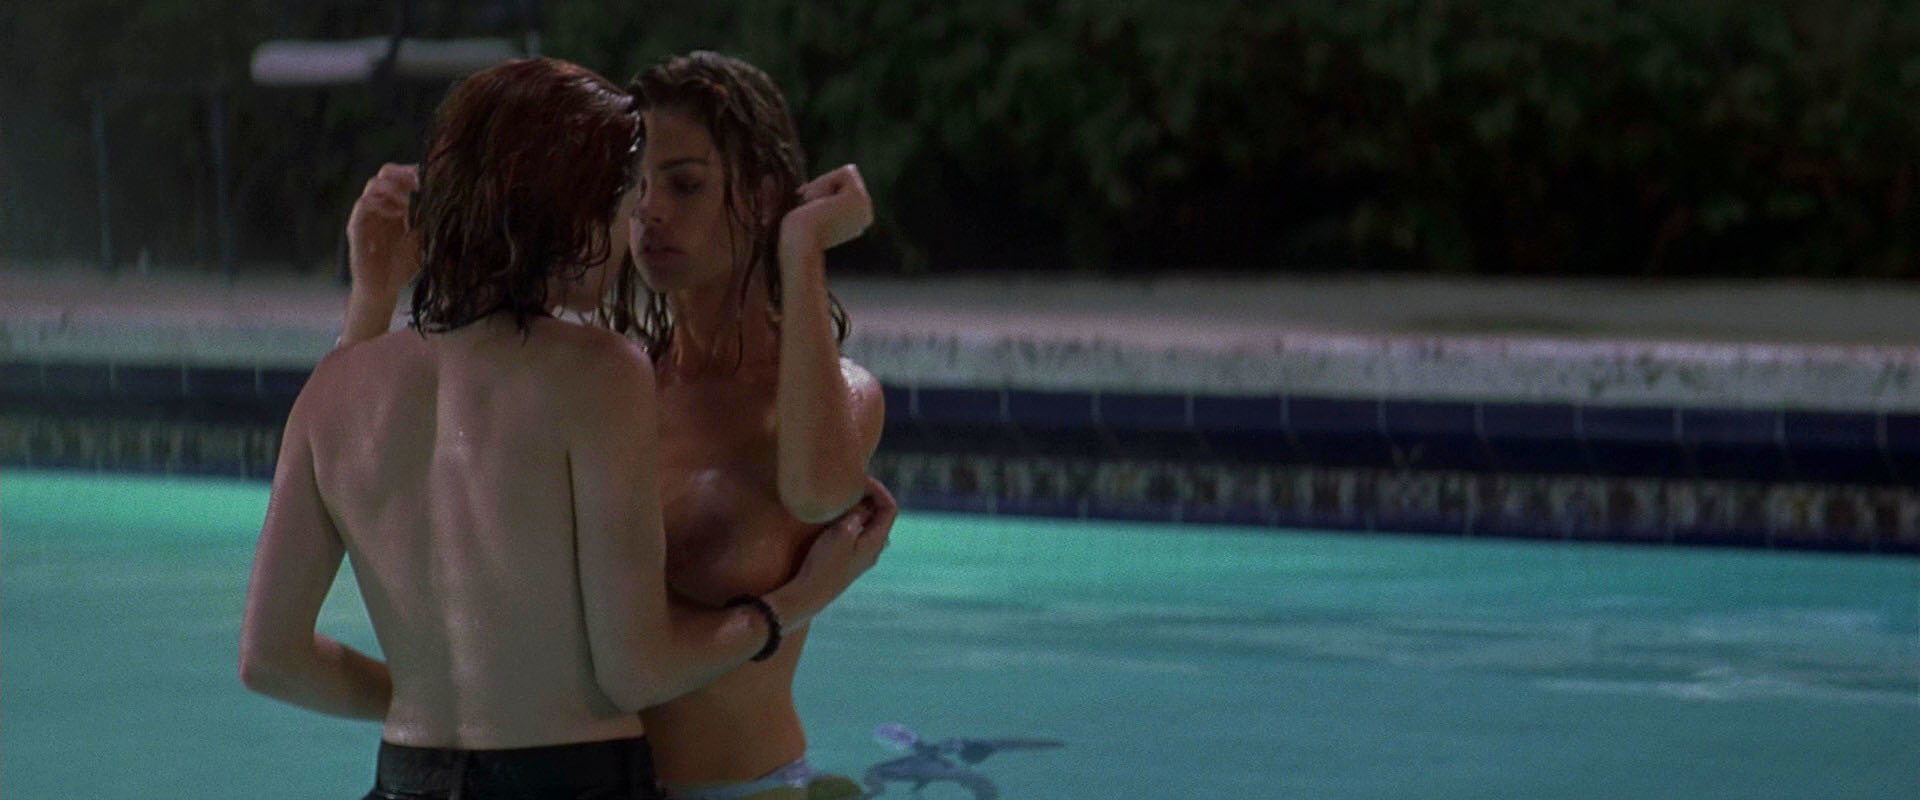 Denise richards is doing lesbian acts on film